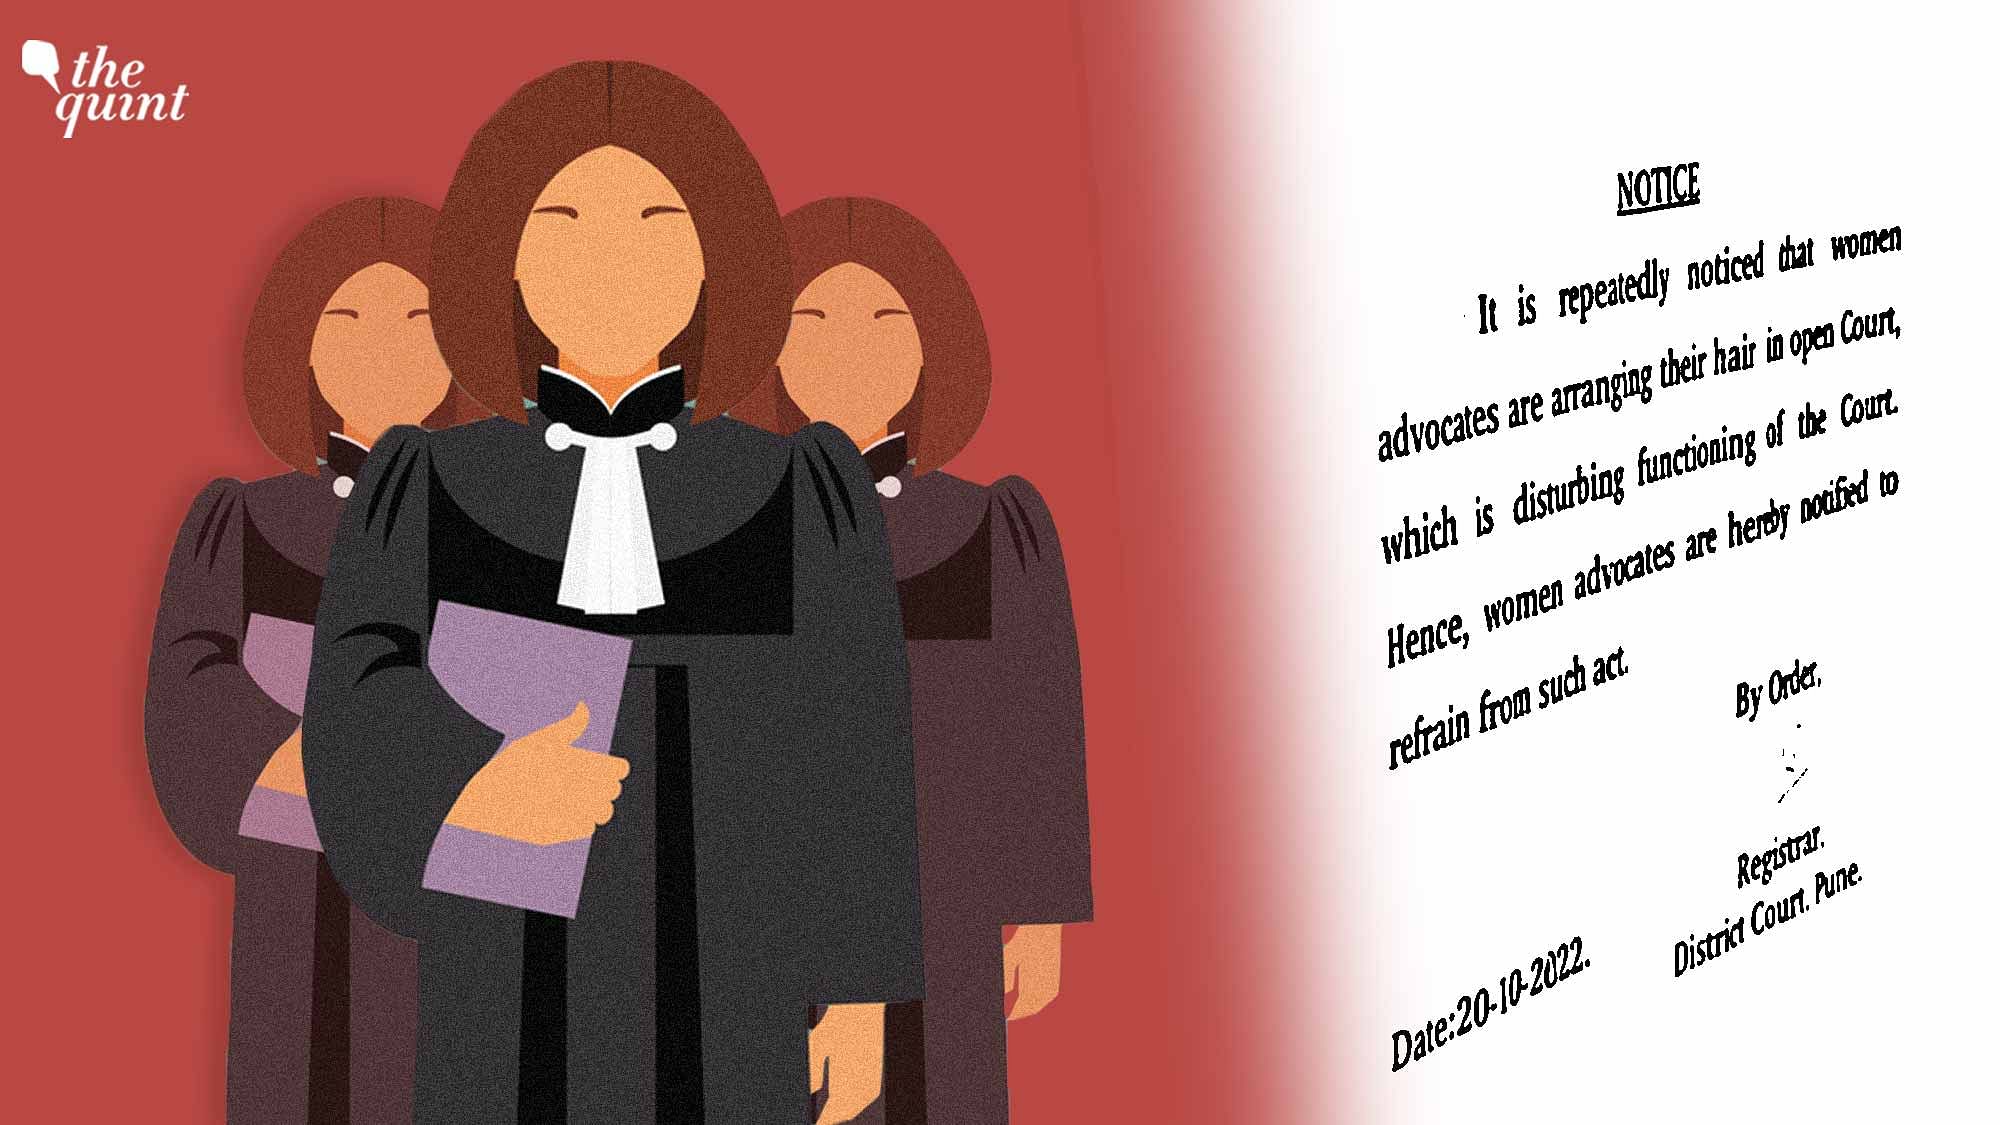 <div class="paragraphs"><p><a href="https://www.thequint.com/neon/gender/she-the-first-story-of-grit-cornelia-sorabji-indias-first-female-lawyer-video">Women lawyers</a> arranging their hair in "open court" disturbs the functioning of the court, stated a controversial notice allegedly issued by the Pune District <a href="https://www.thequint.com/neon/gender/sc-abortion-focuses-on-reproductive-rights-of-women">Court</a>, which has now been quietly withdrawn.</p></div>